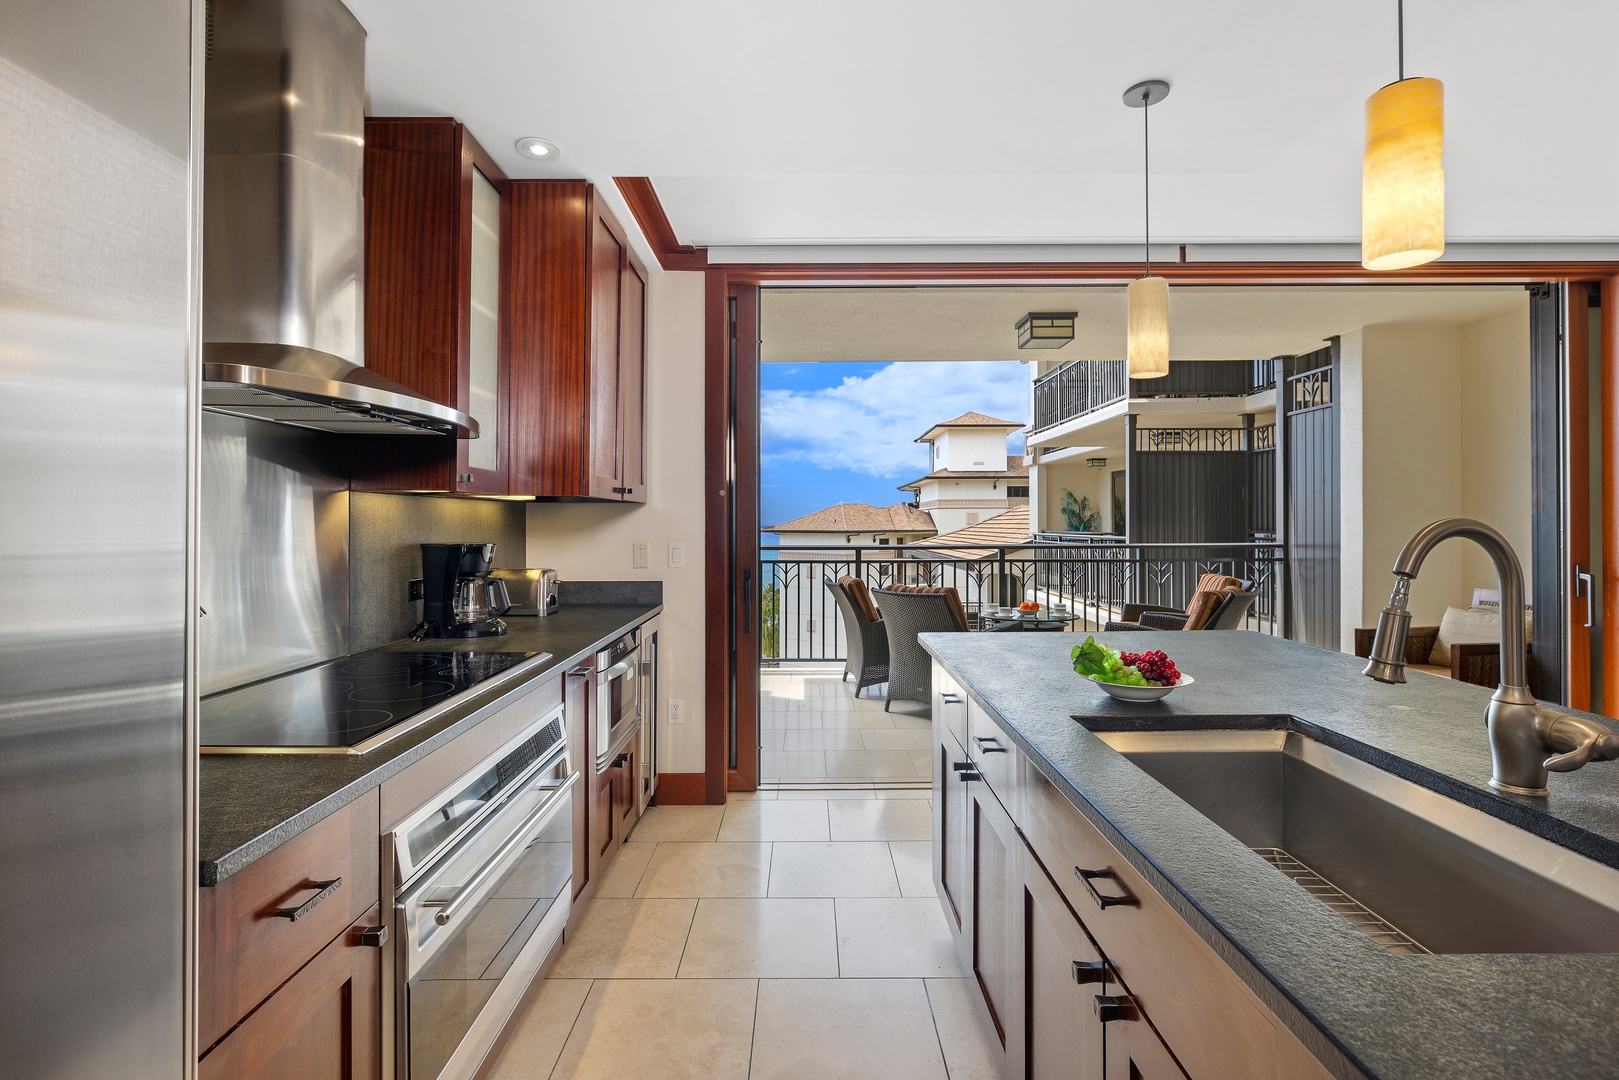 Kapolei Vacation Rentals, Ko Olina Beach Villas O1001 - Fully stocked kitchen with stainless steel appliances is a chef's delight.